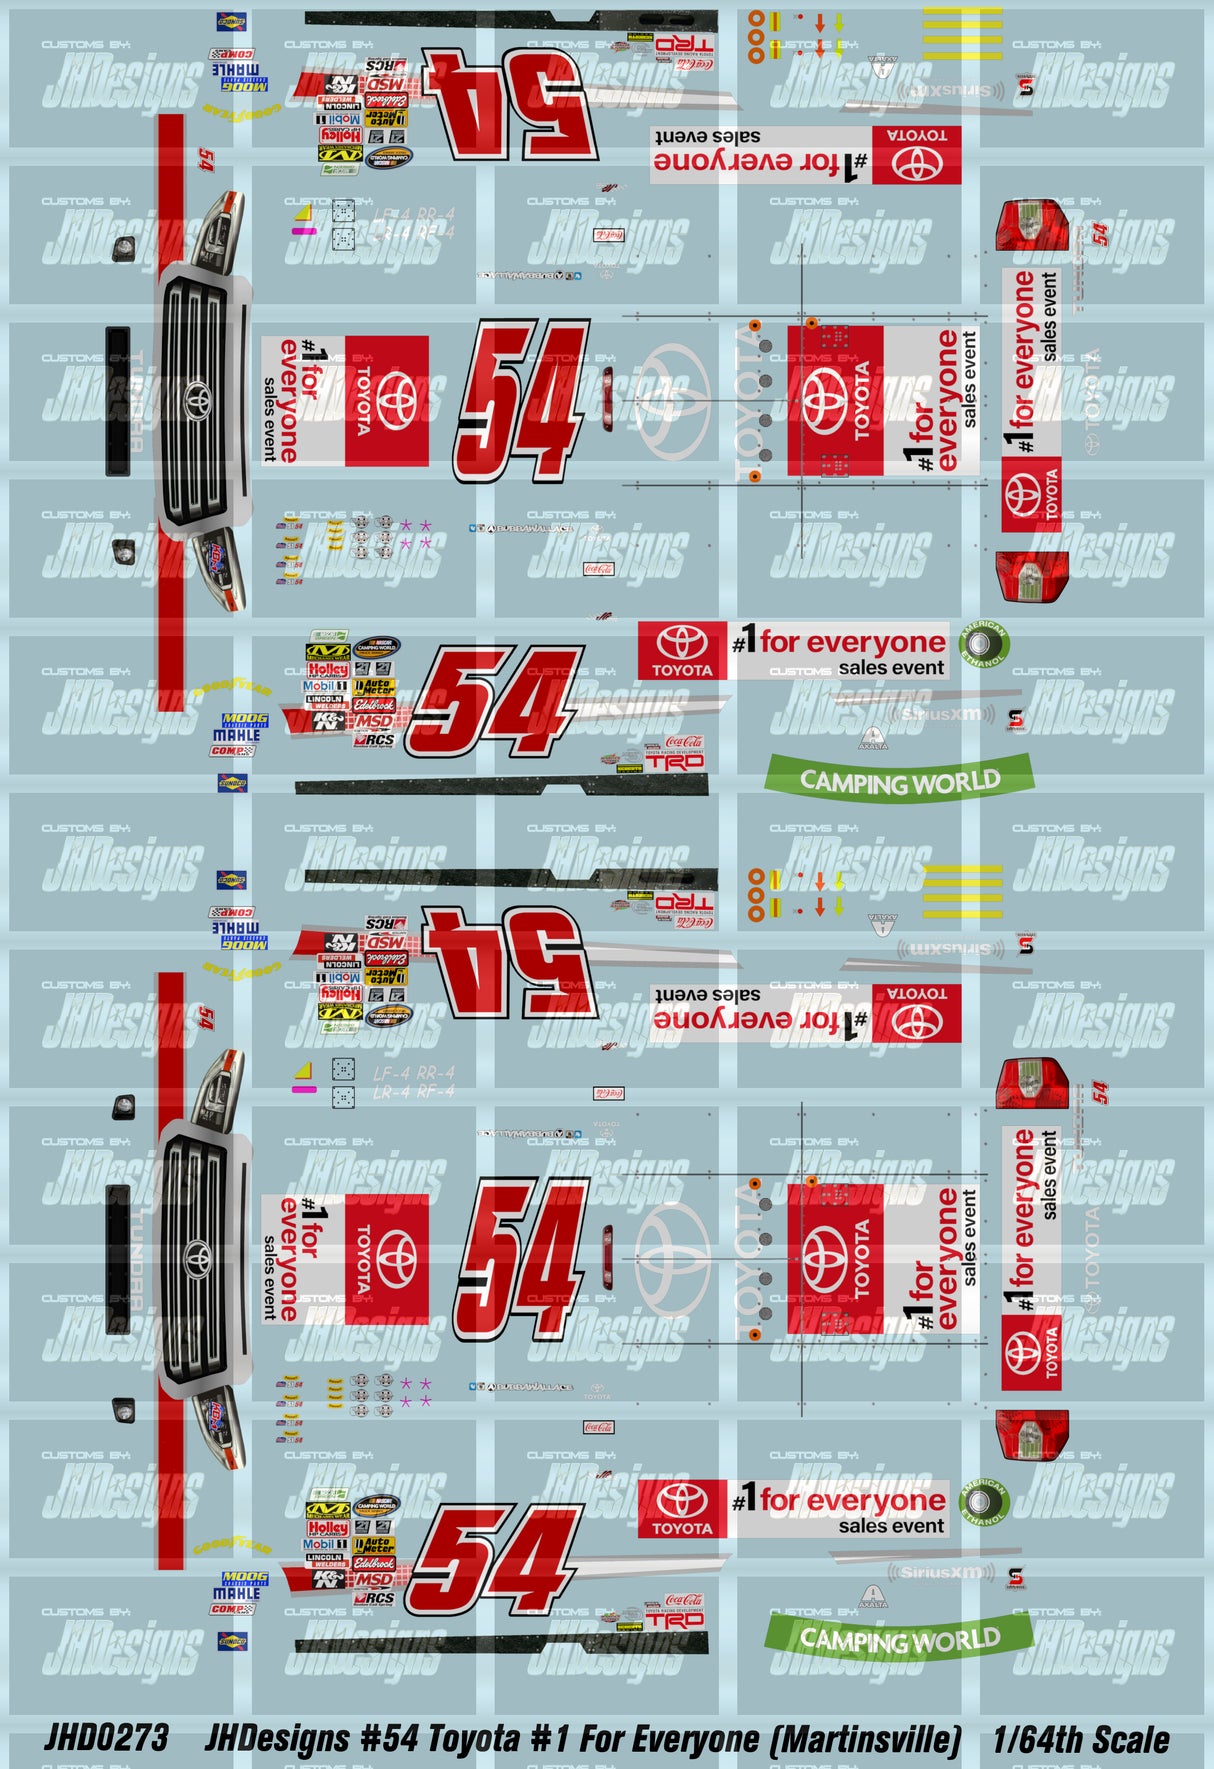 JH Designs Bubba Wallace 2014 CWTS #54 Toyota #1 for Everyone Sale Event (Martinsville Race) 1:64 Racecar Decal Set